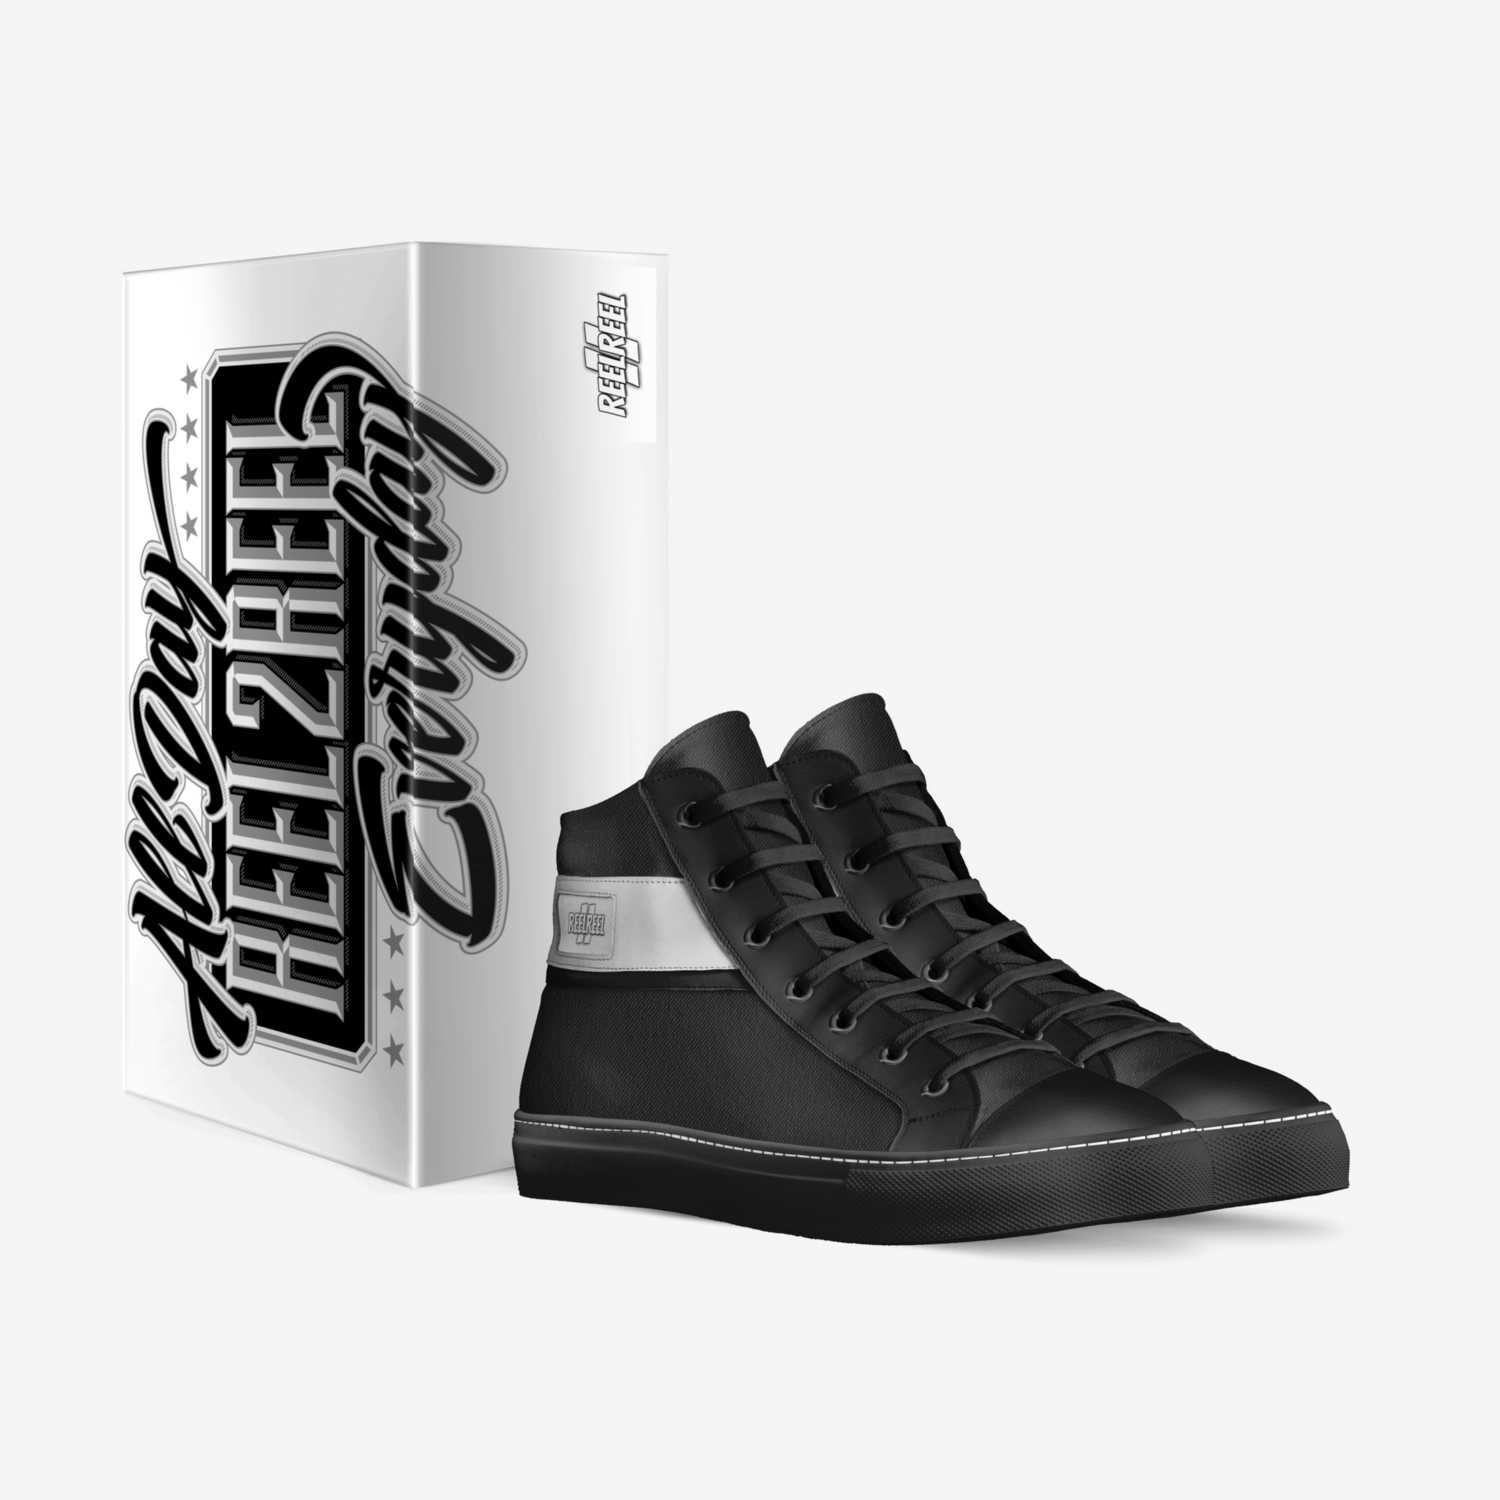 NEWLIFE custom made in Italy shoes by Reel2reel Kustoms | Box view